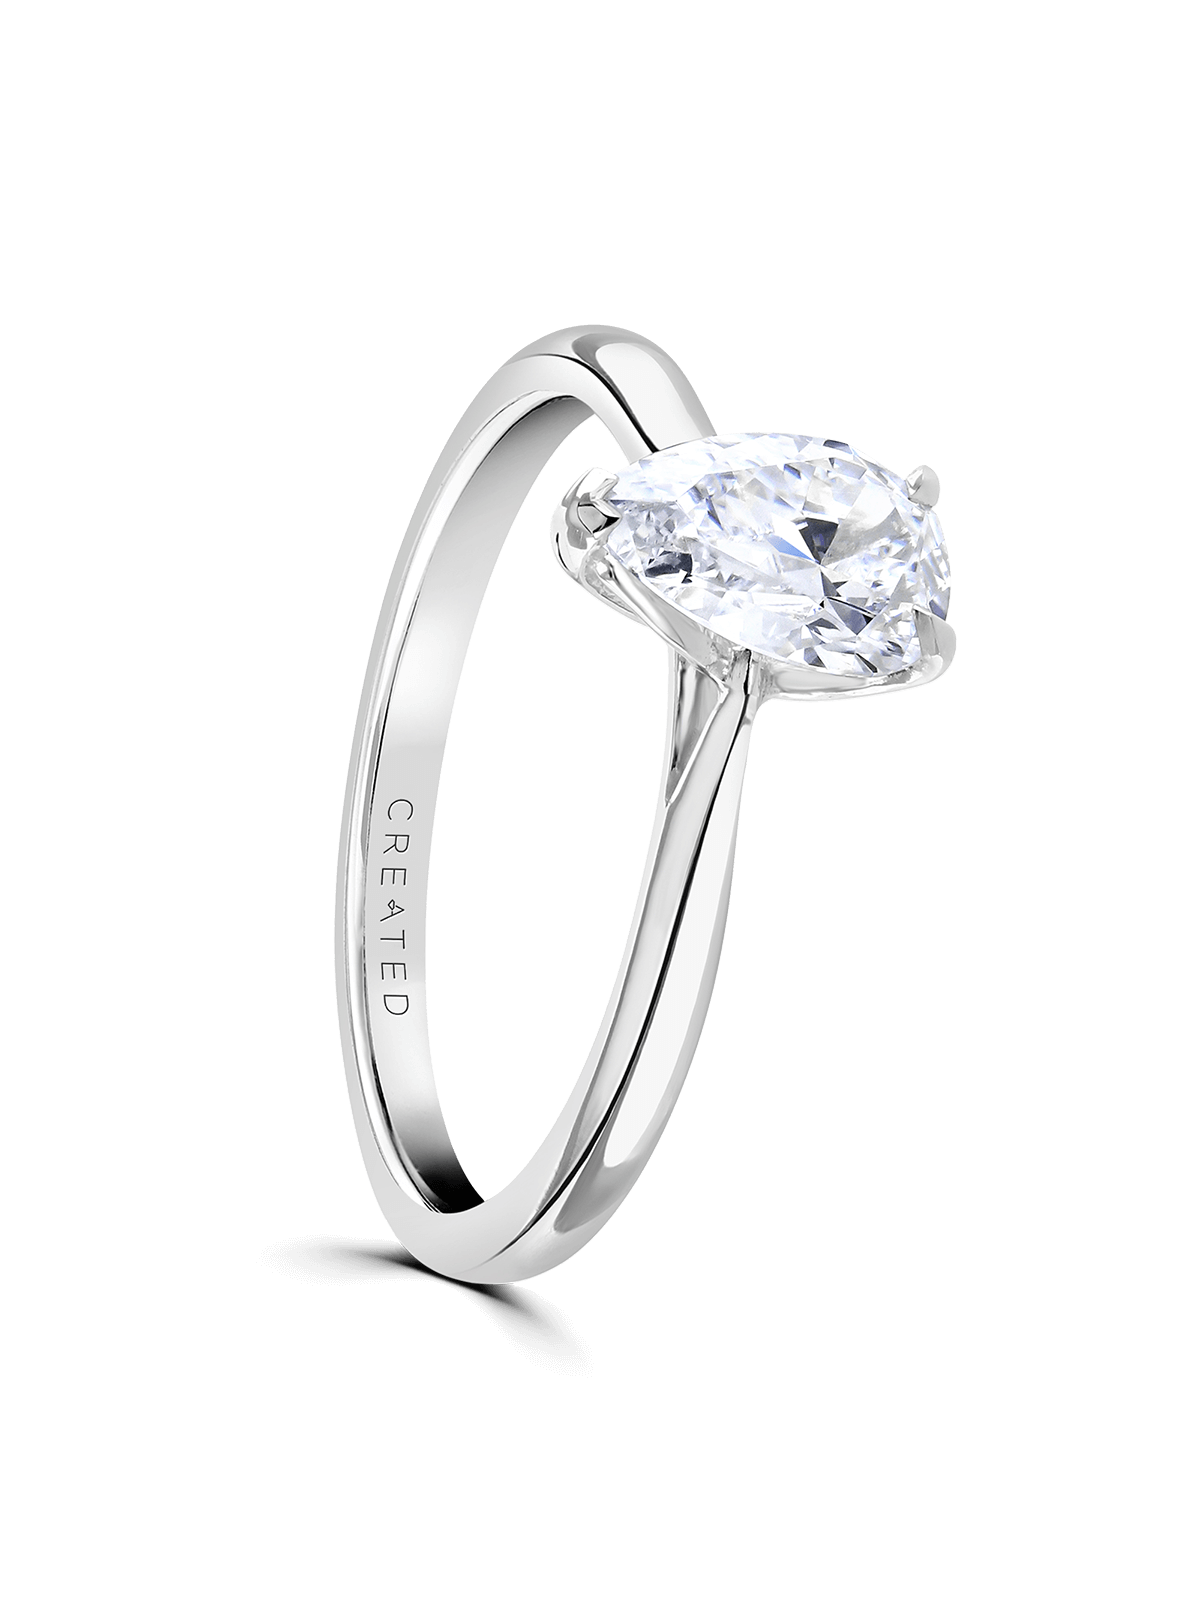 "Magnolia" Approx 1.00ct Pear Cut Lab Grown Diamond Solitaire Engagement Ring in Platinum